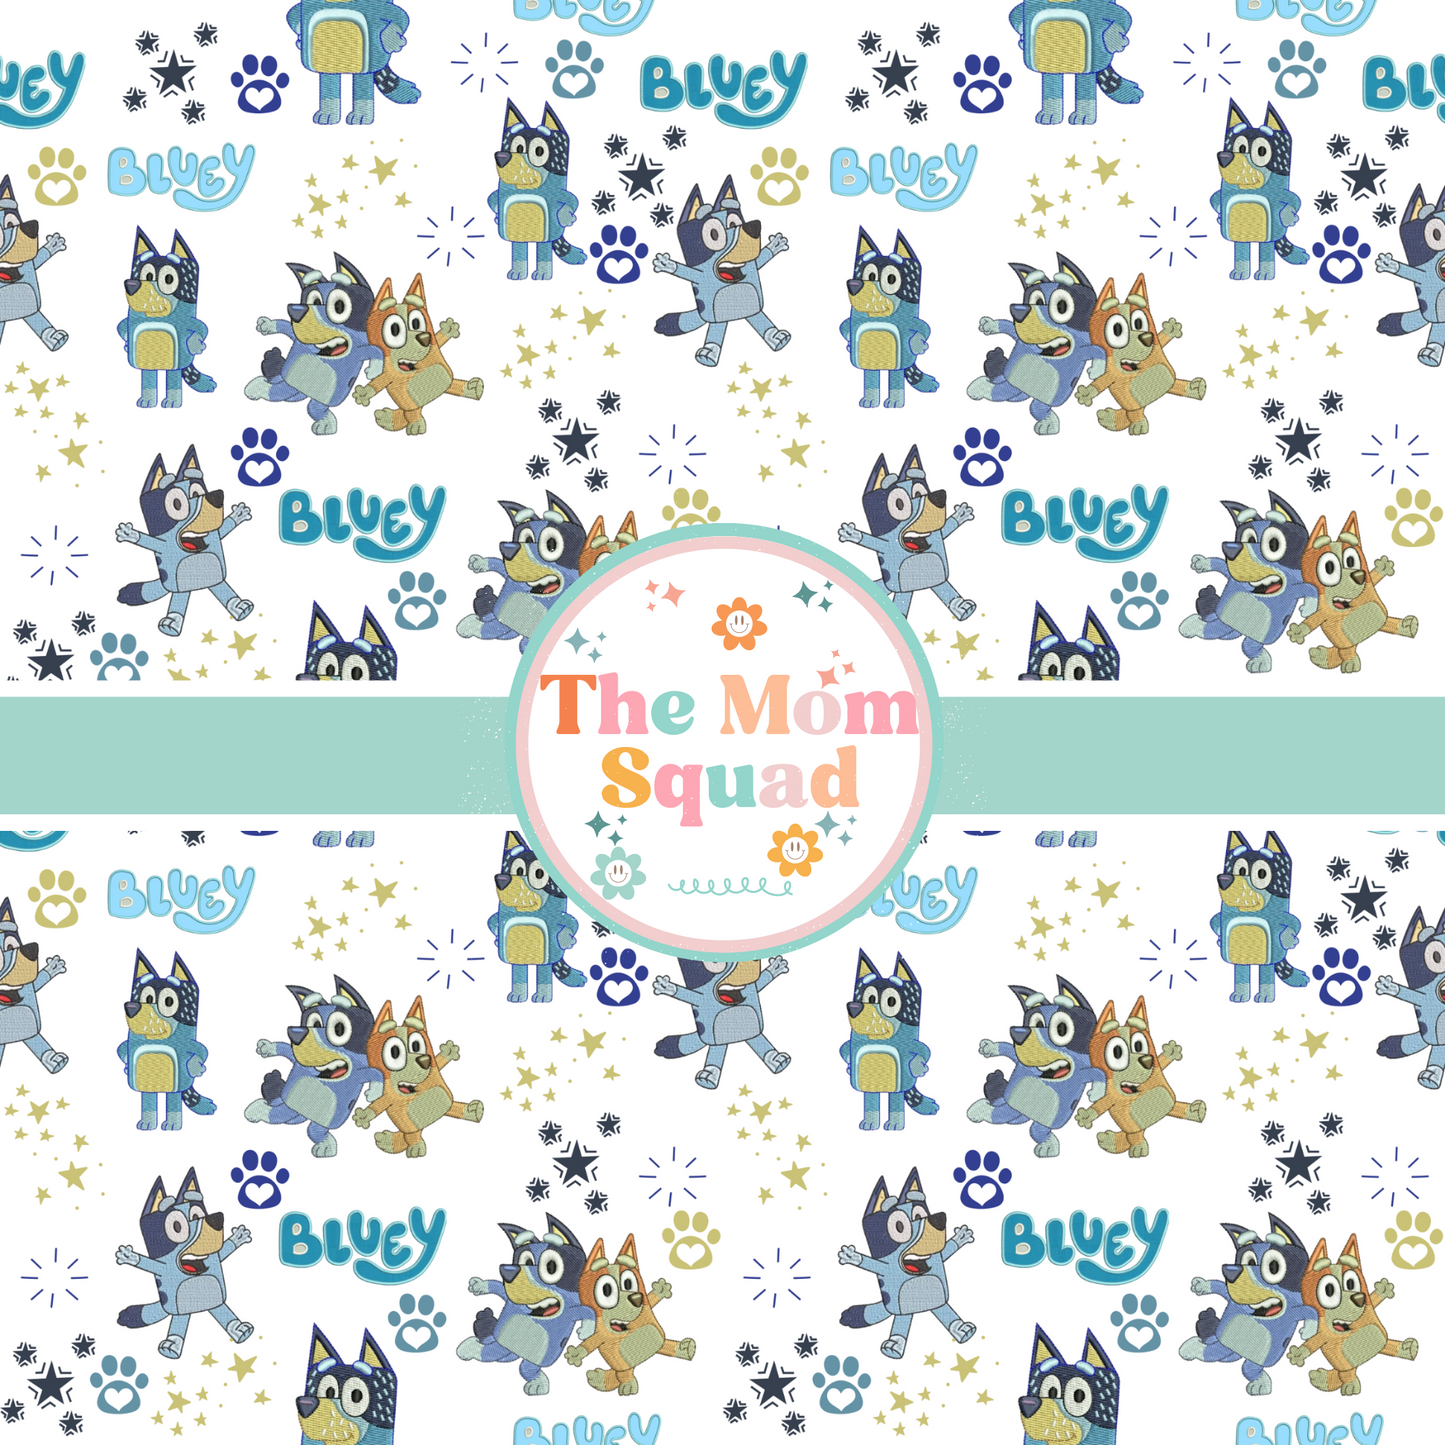 Charming 12" x 12" Bluey Embroidery Seamless Pattern: Instant Download Delight! Bluey & Bingo Seamless Pattern Digital Paper